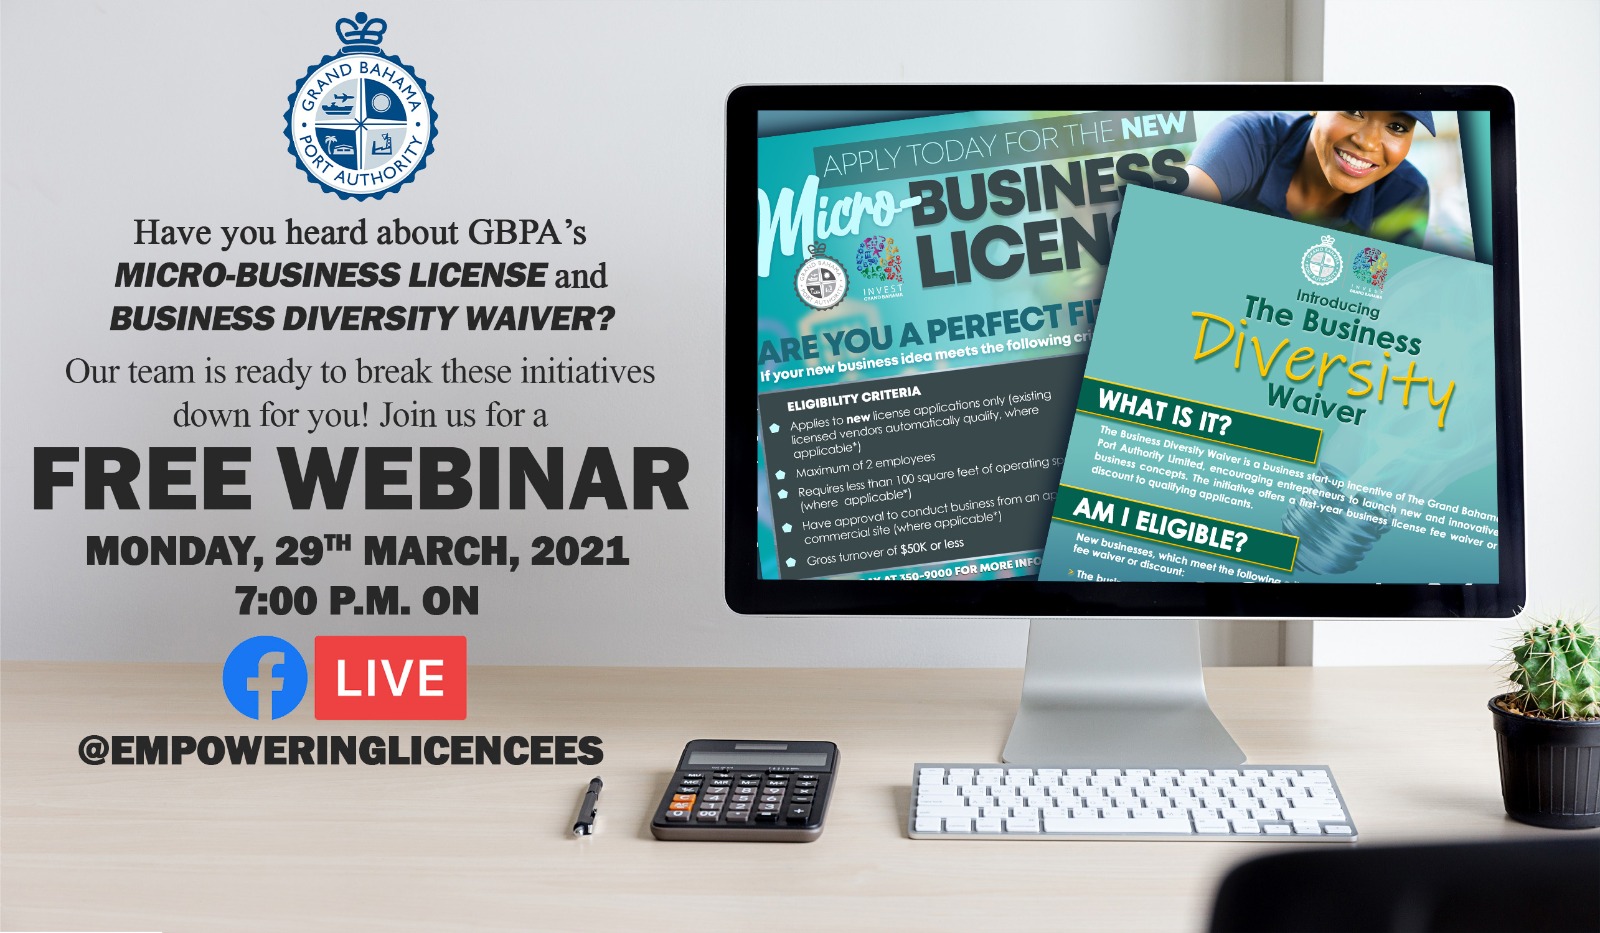 Free Micro-Business License & Business Diversity Waiver Webinar